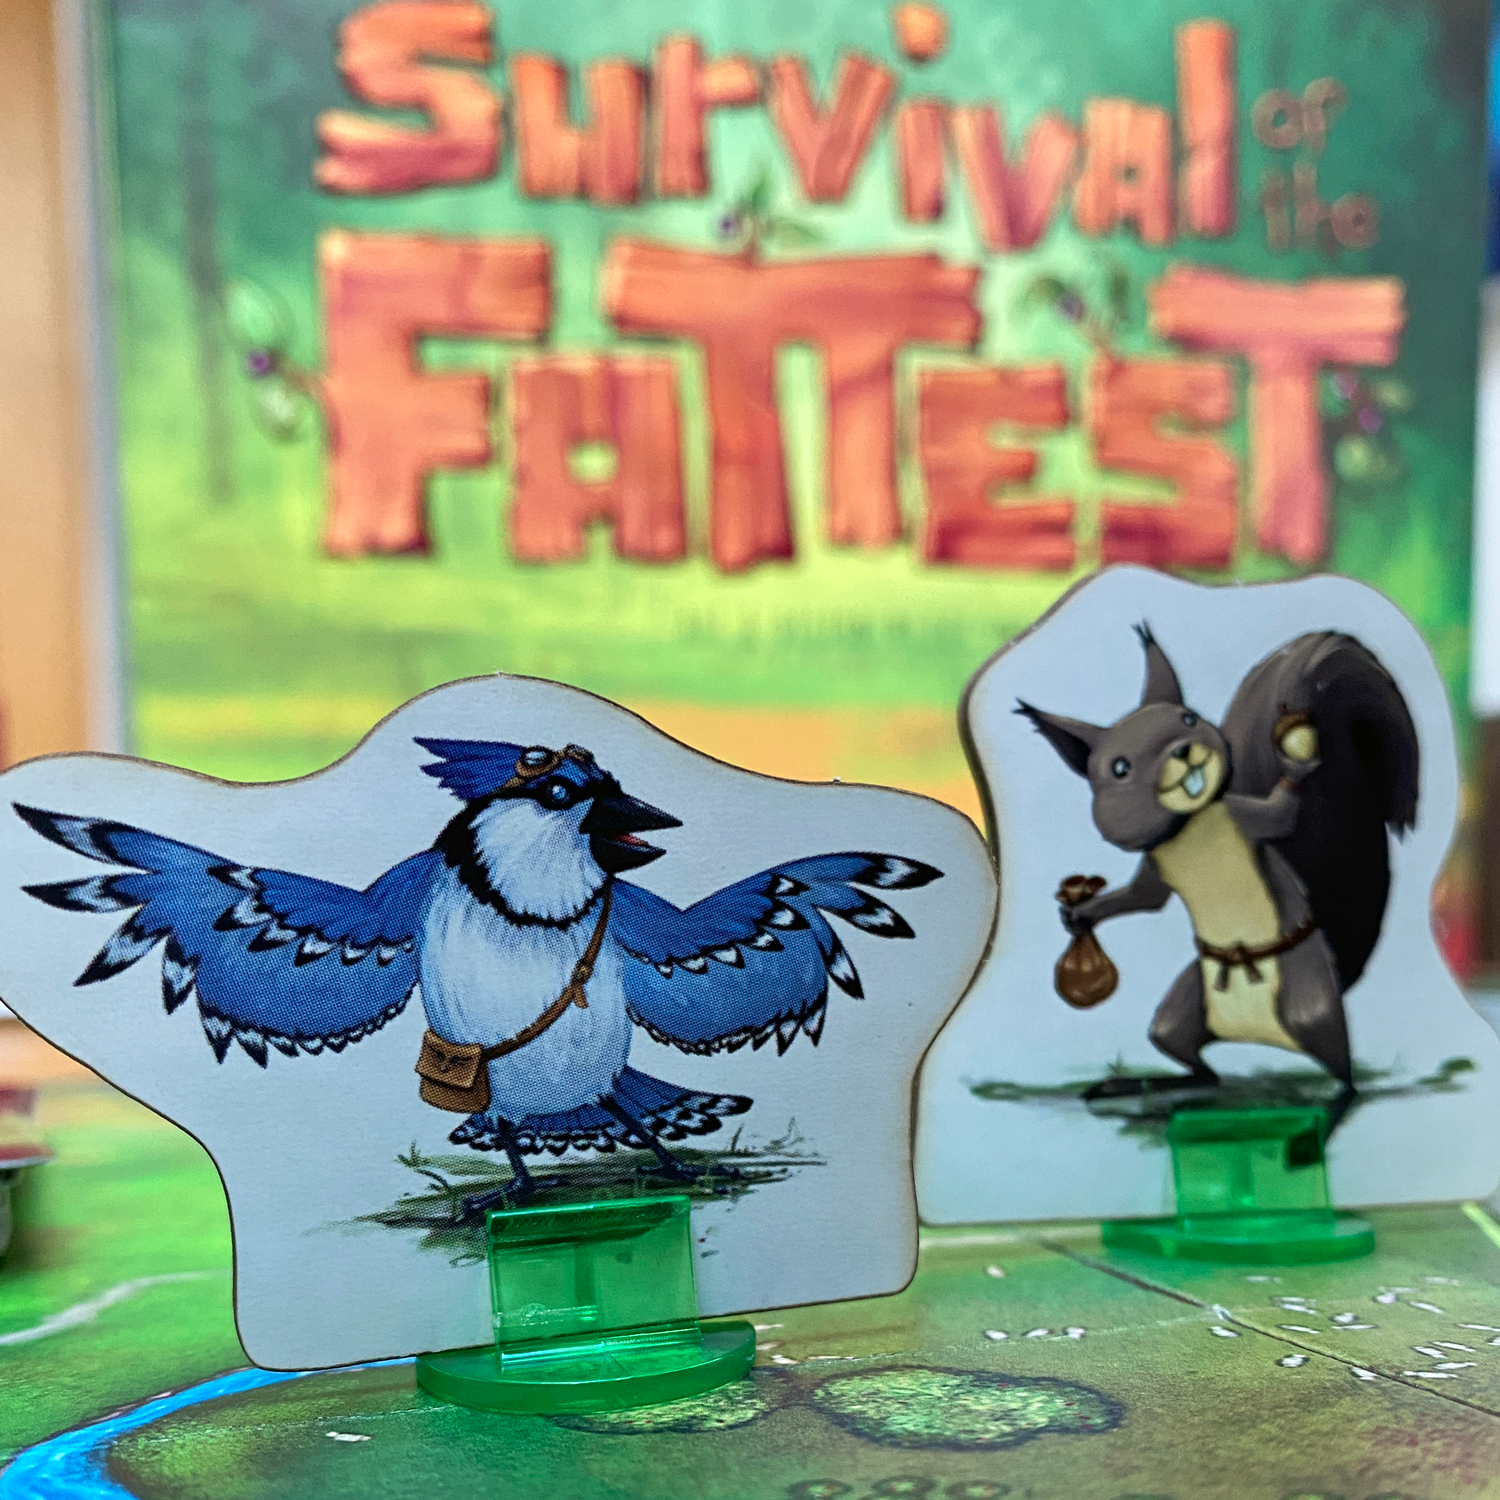 Standees from Survival of the FattestImage © Board Game Review UK